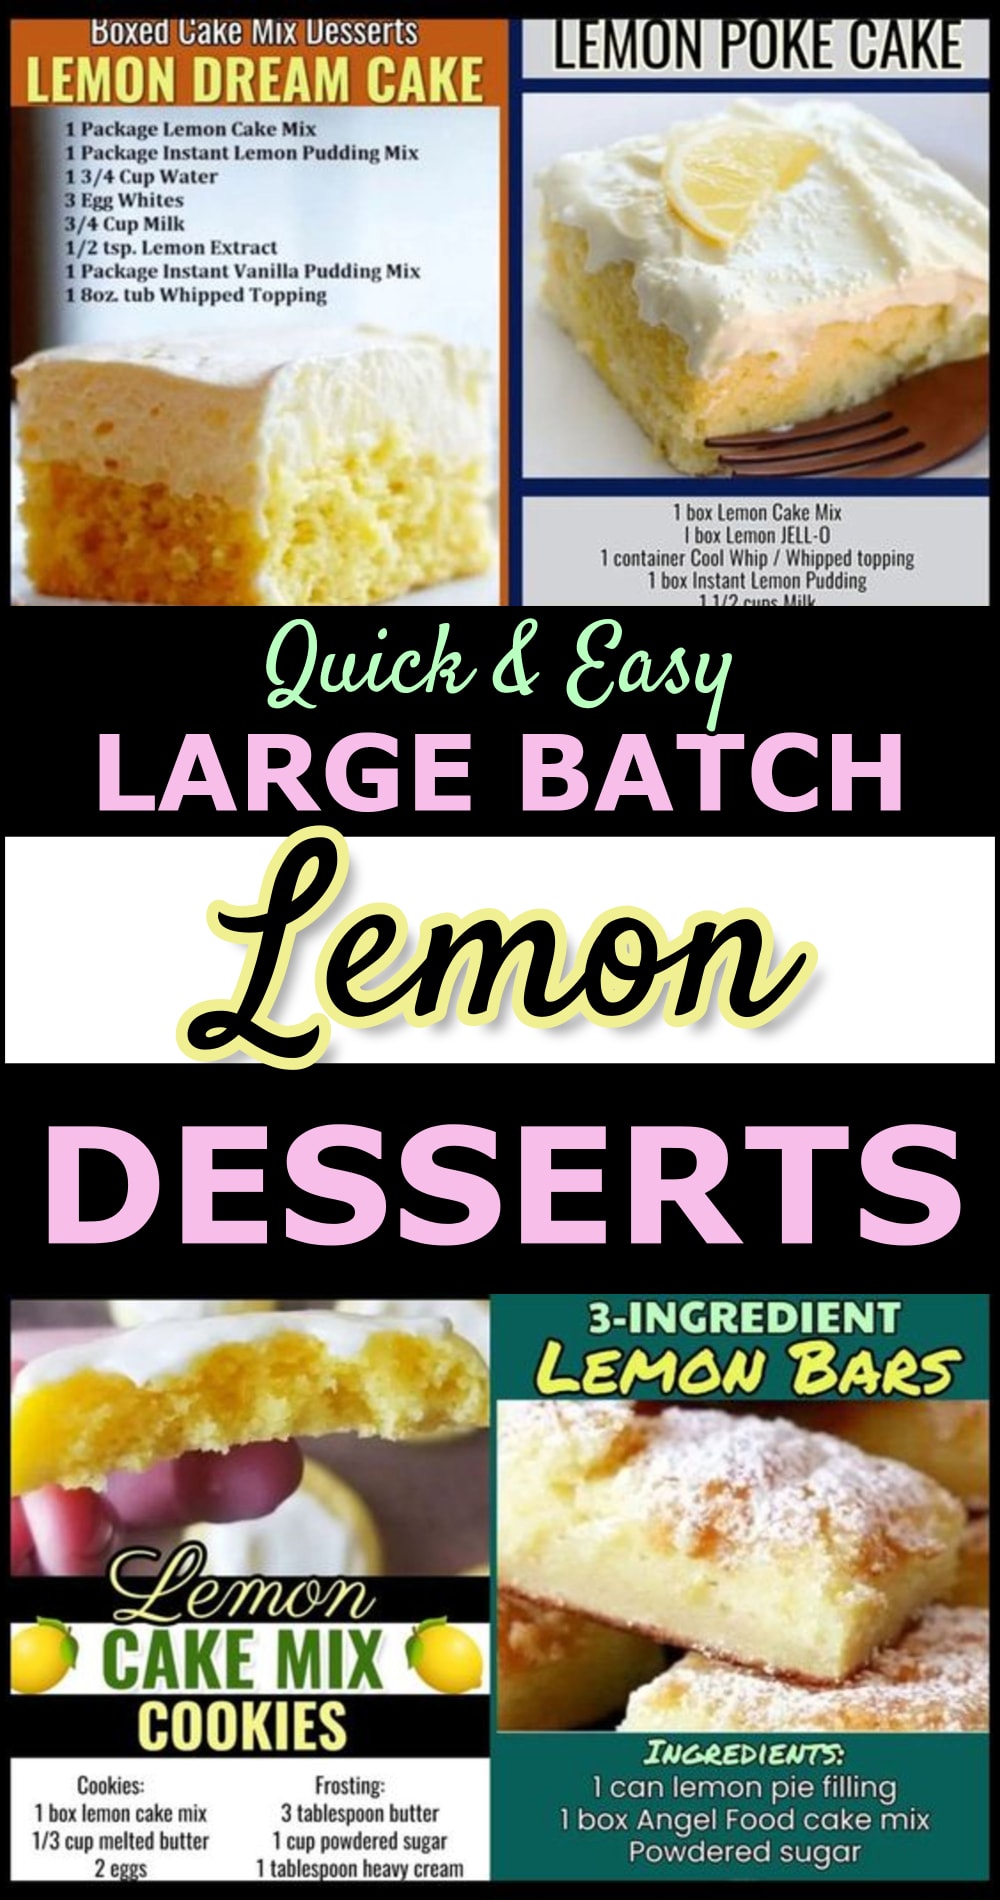 Easy large batch desserts with doctored lemon cake mix - perfect for a potluck crowd, church luncheon, or work party at your office.